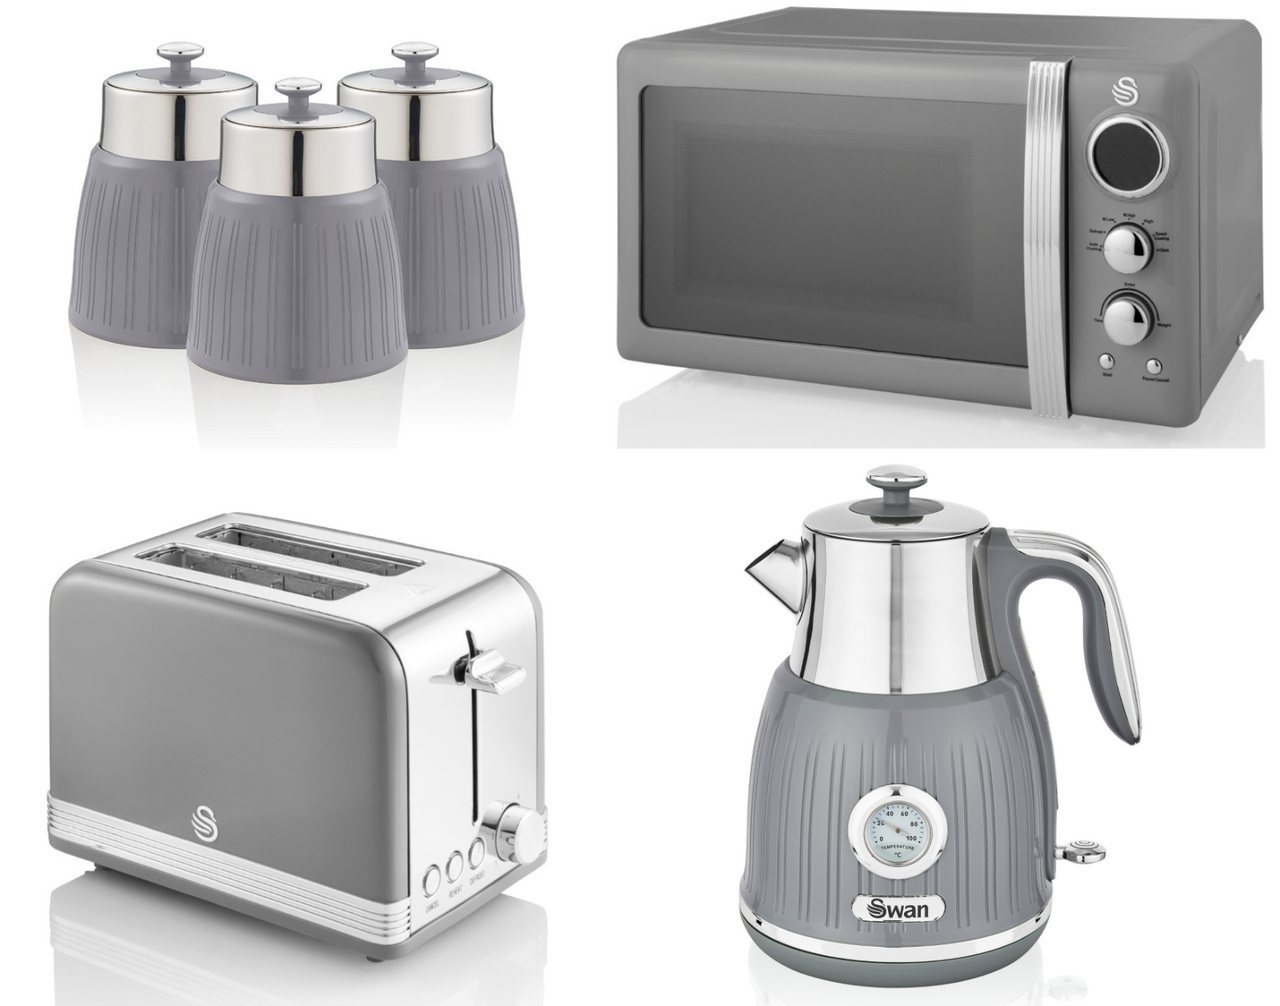 SWAN Retro Grey Jug Dial Kettle 2 Slice Toaster Microwave & 3 Canisters Set